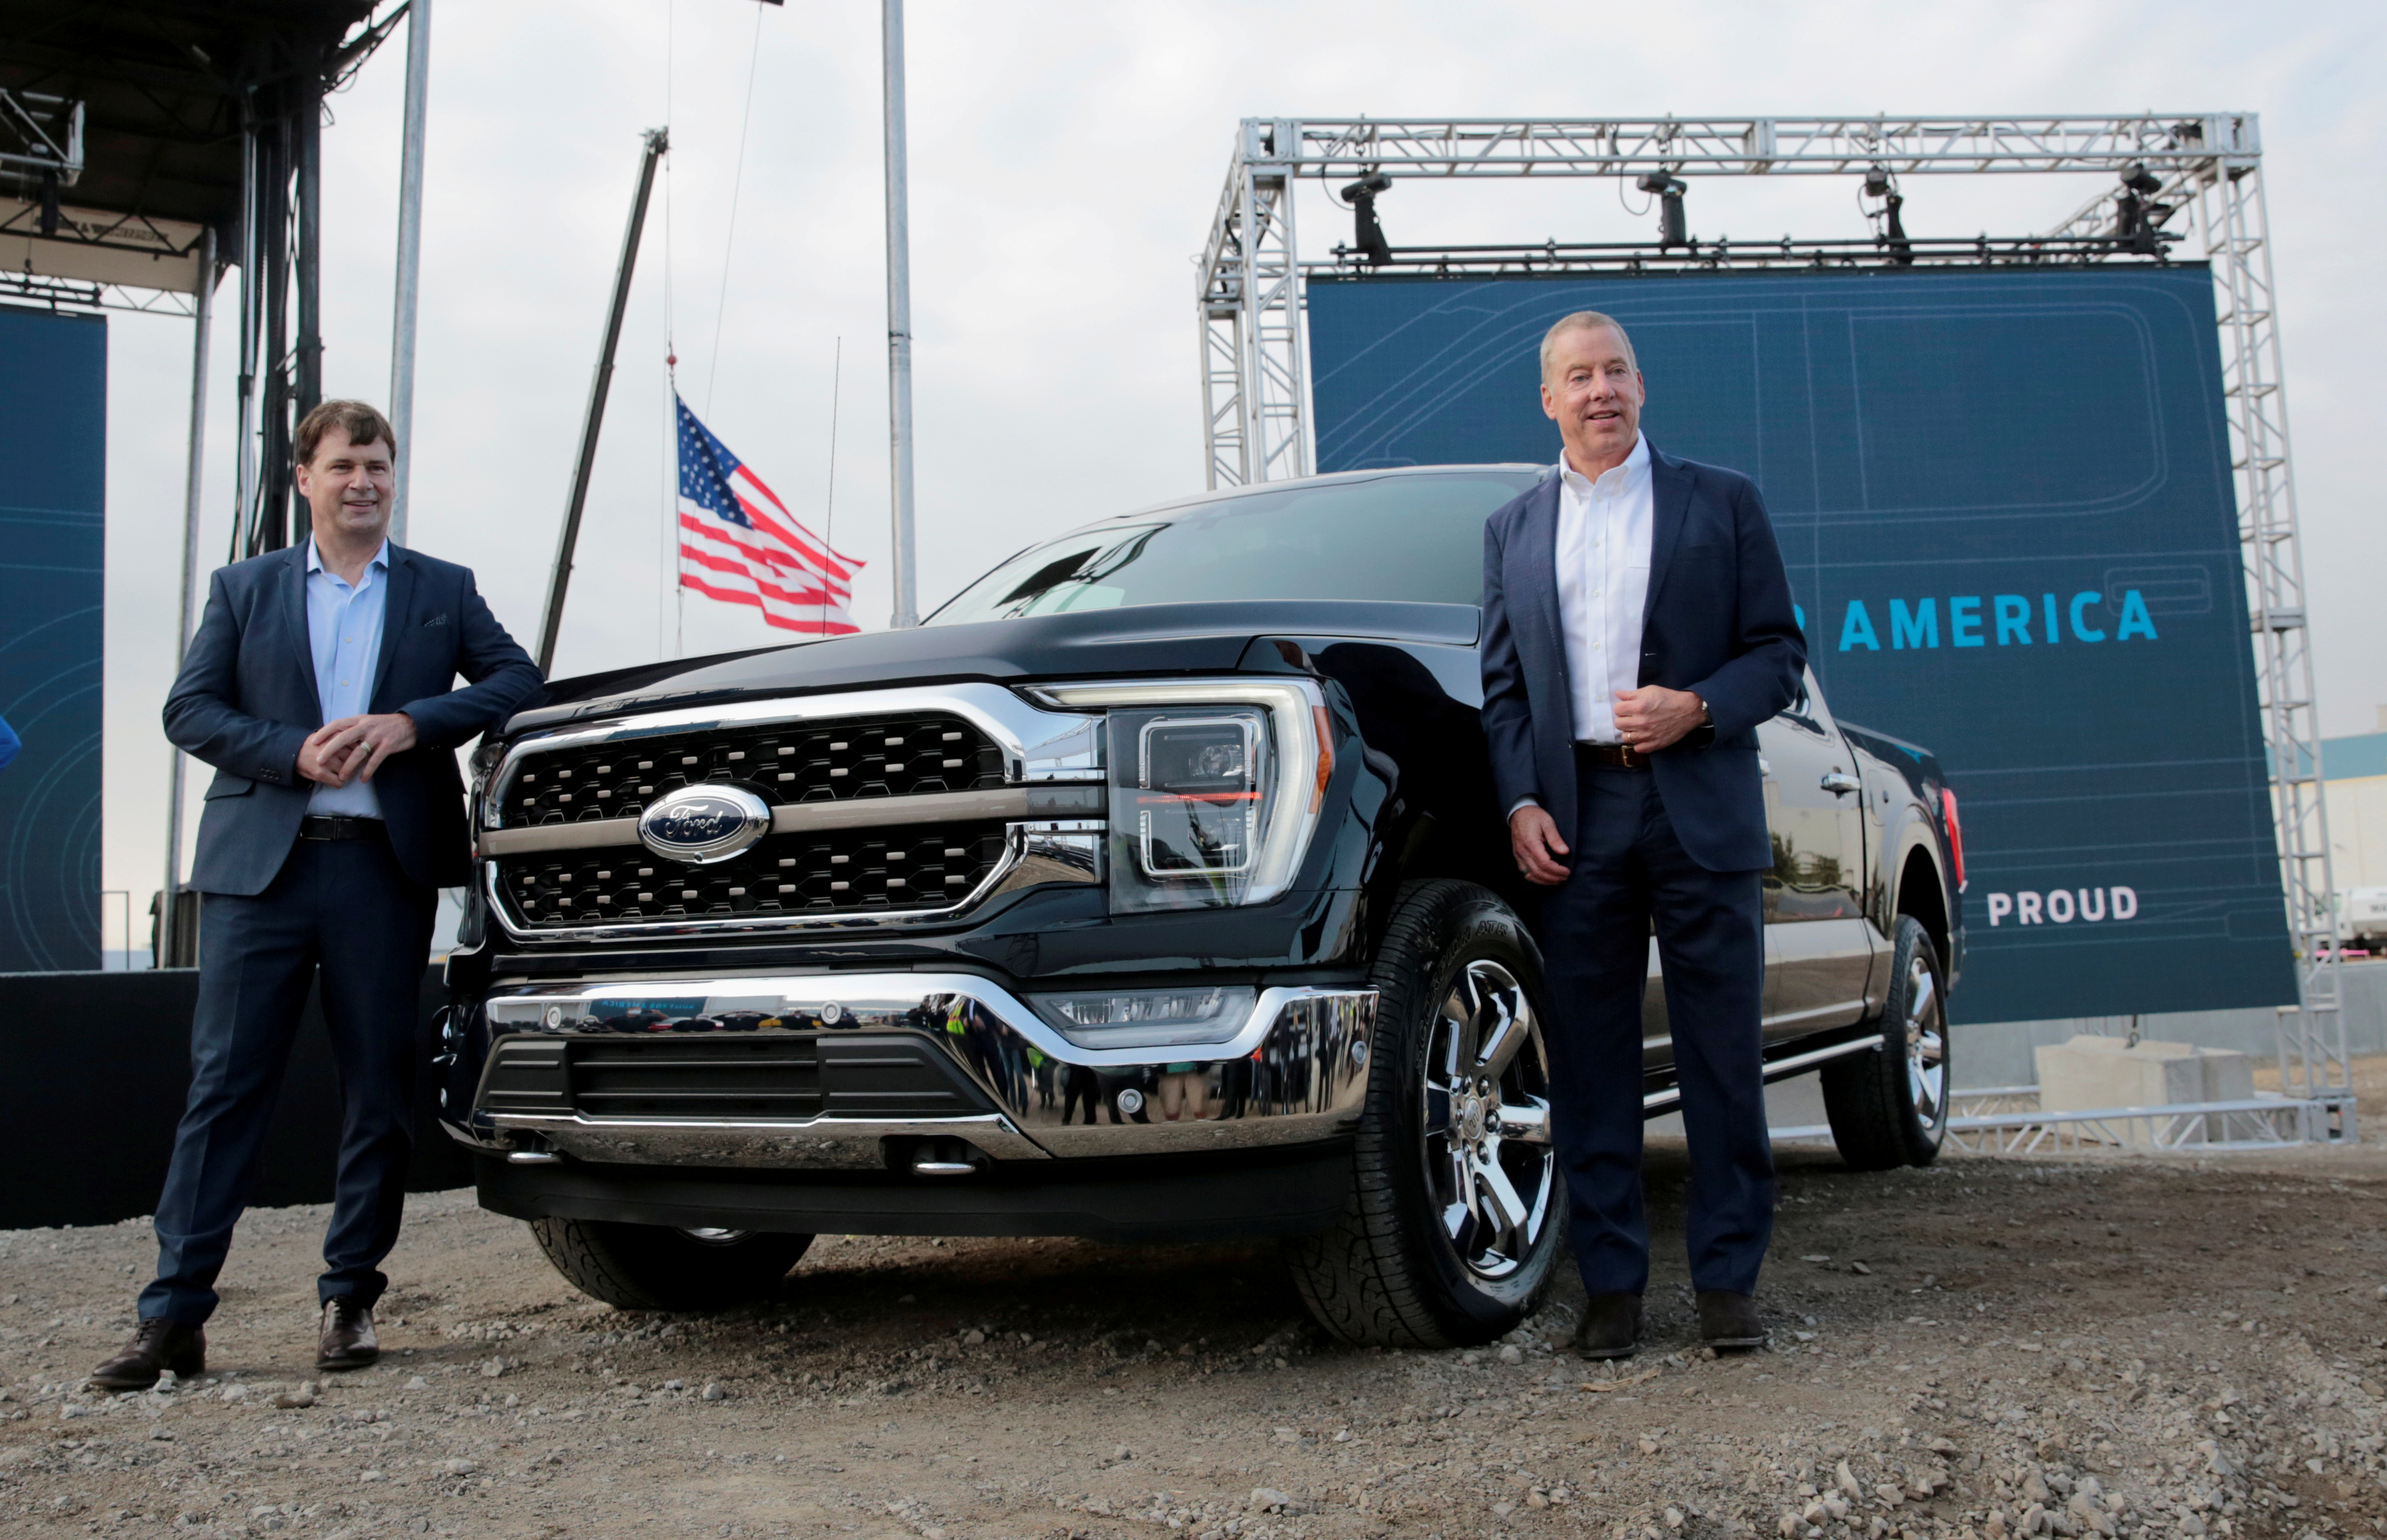 Ford Motor Co. CEO Jim Farley and Executive Chairman Bill Ford Jr. pose next to a new 2021 Ford F-150 pickup truck in Dearborn, Michigan